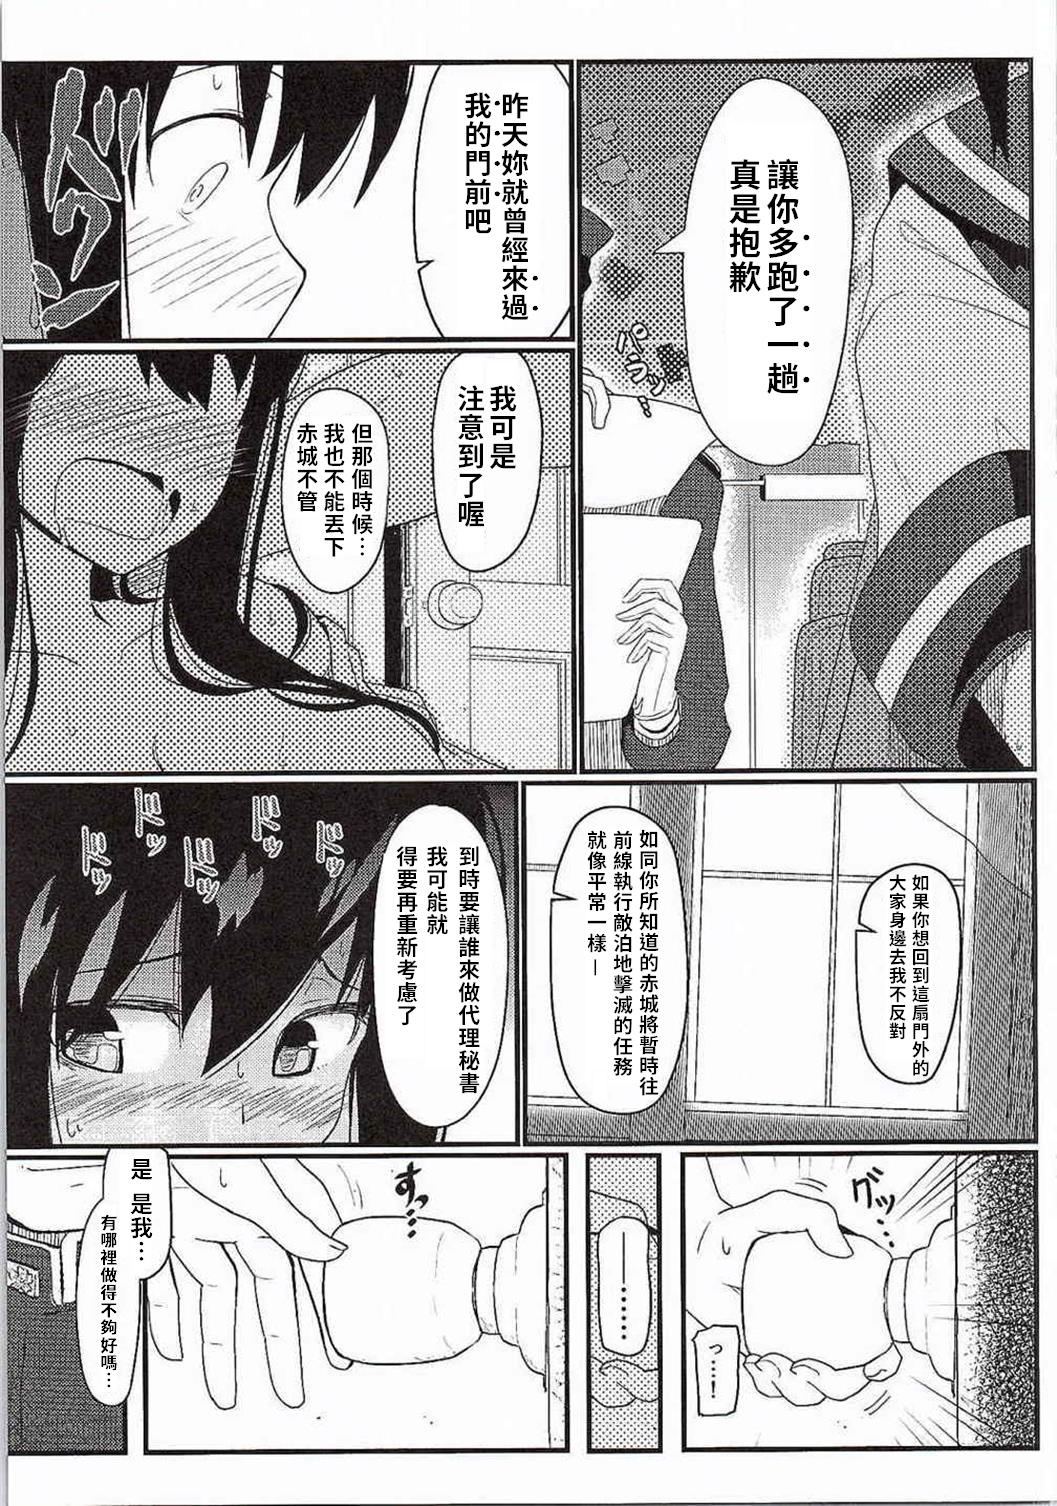 Thylinh GIRLFriend's 7 - Kantai collection 8teen - Page 5